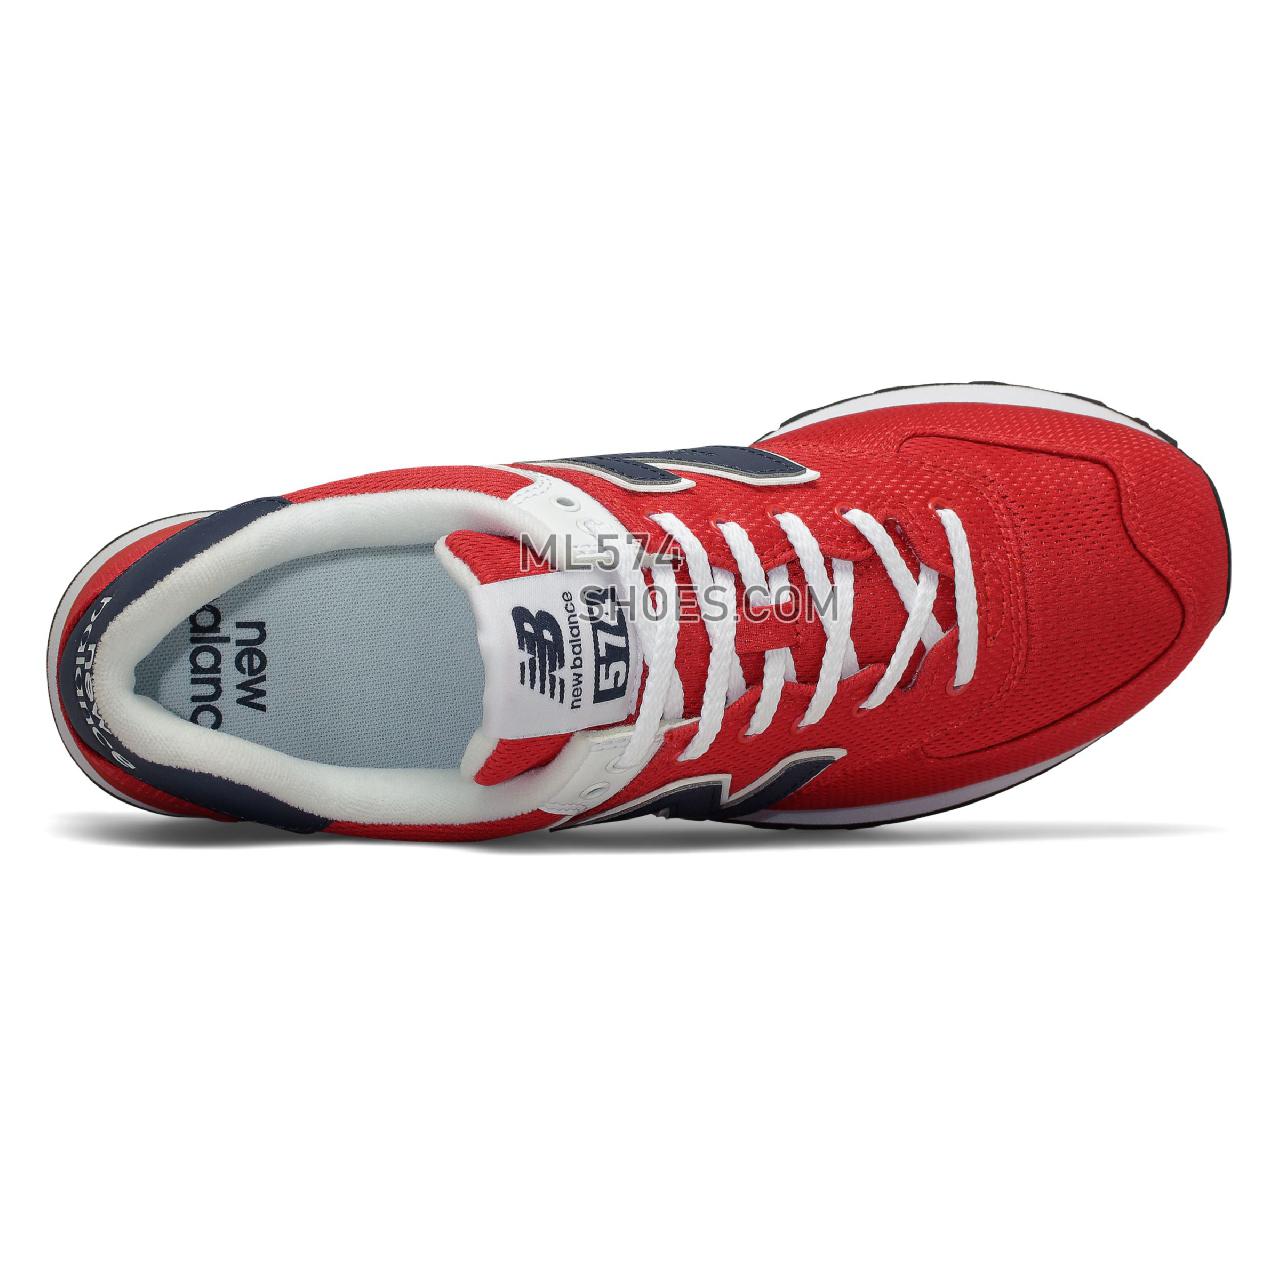 New Balance 574 - Men's Classic Sneakers - Team Red with Natural Indigo - ML574SCH